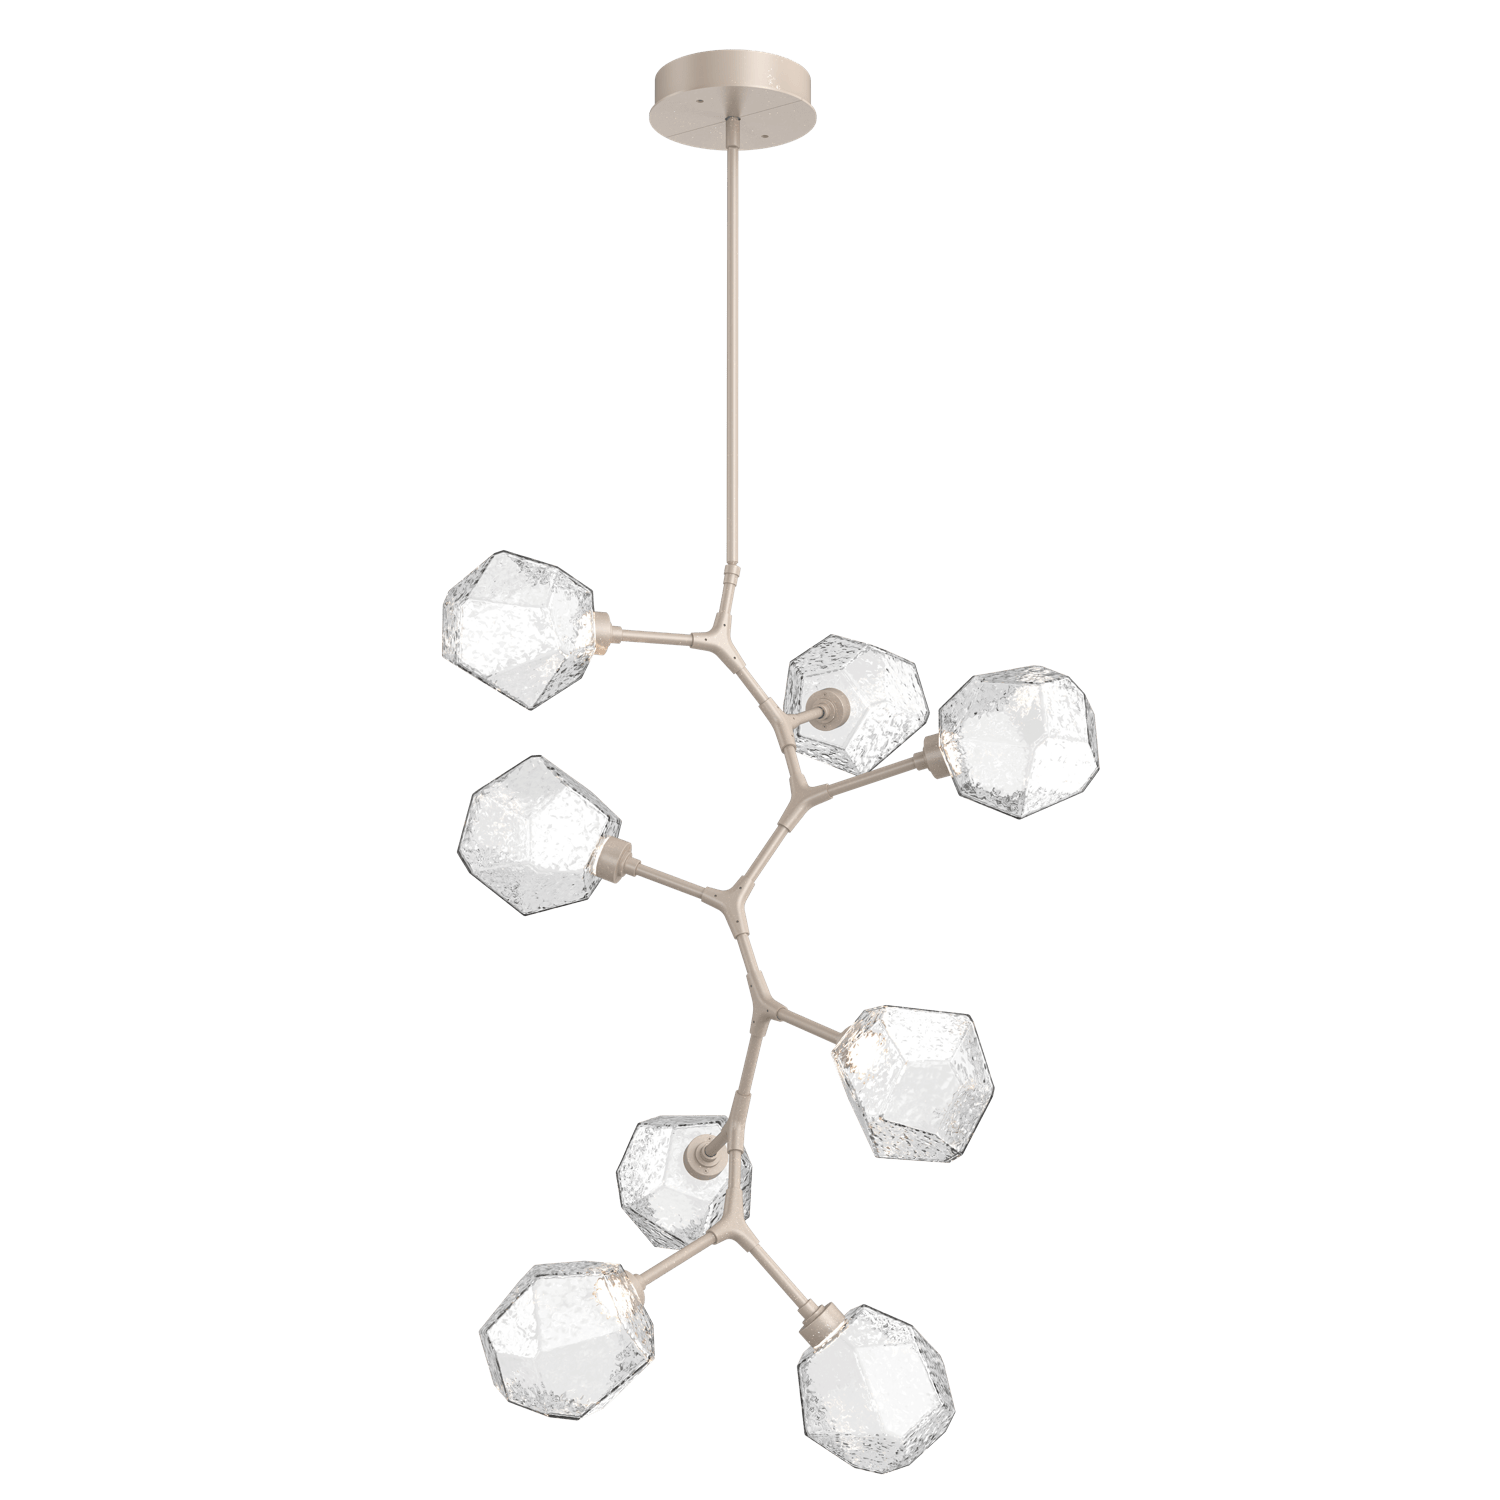 CHB0039-VB-BS-C-Hammerton-Studio-Gem-8-light-modern-vine-chandelier-with-metallic-beige-silver-finish-and-clear-blown-glass-shades-and-LED-lamping